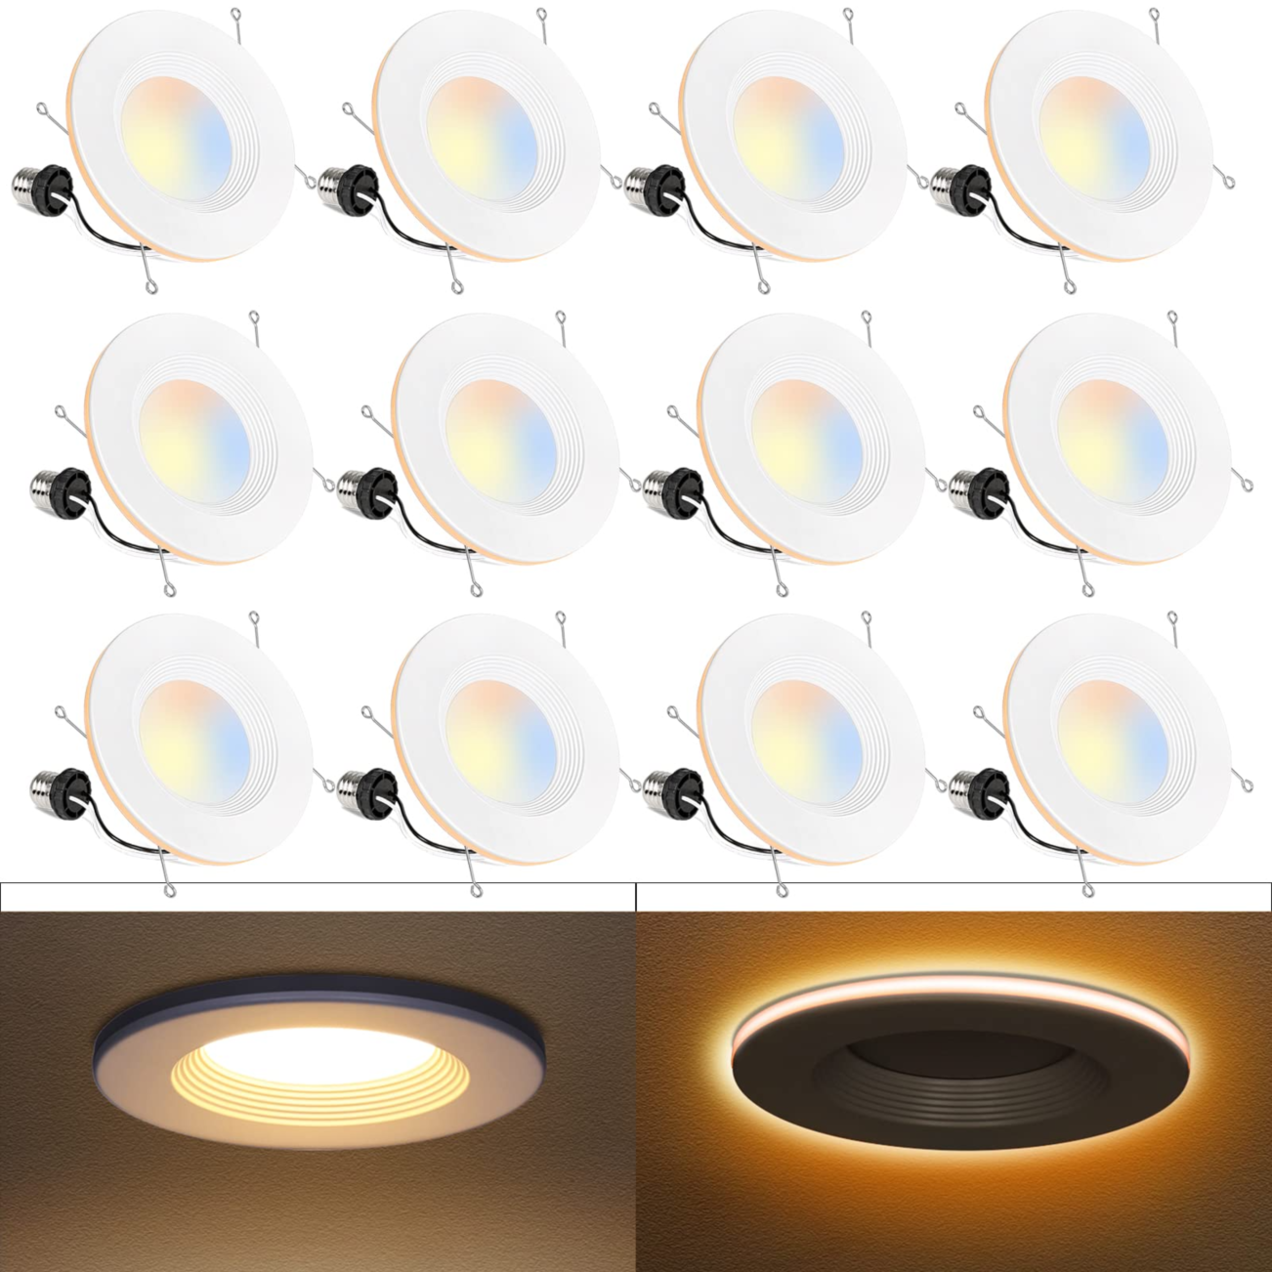 Hykolity 12 Pack 6 Inch Led Recessed Lighting with Night Light for $79.99 + Free Shipping